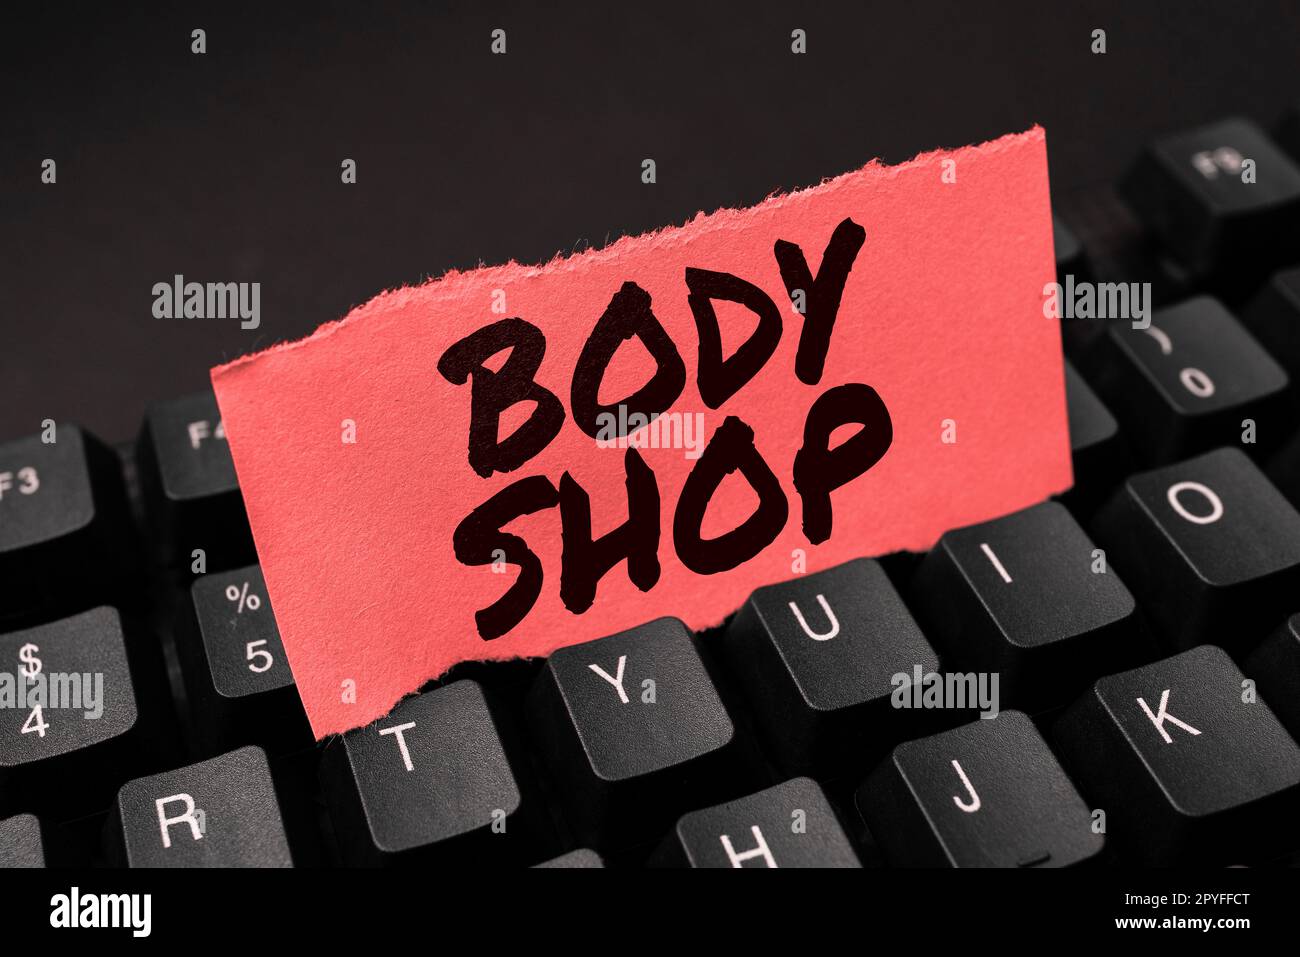 Sign displaying Body Shop. Business approach a shop where automotive bodies are made or repaired Stock Photo